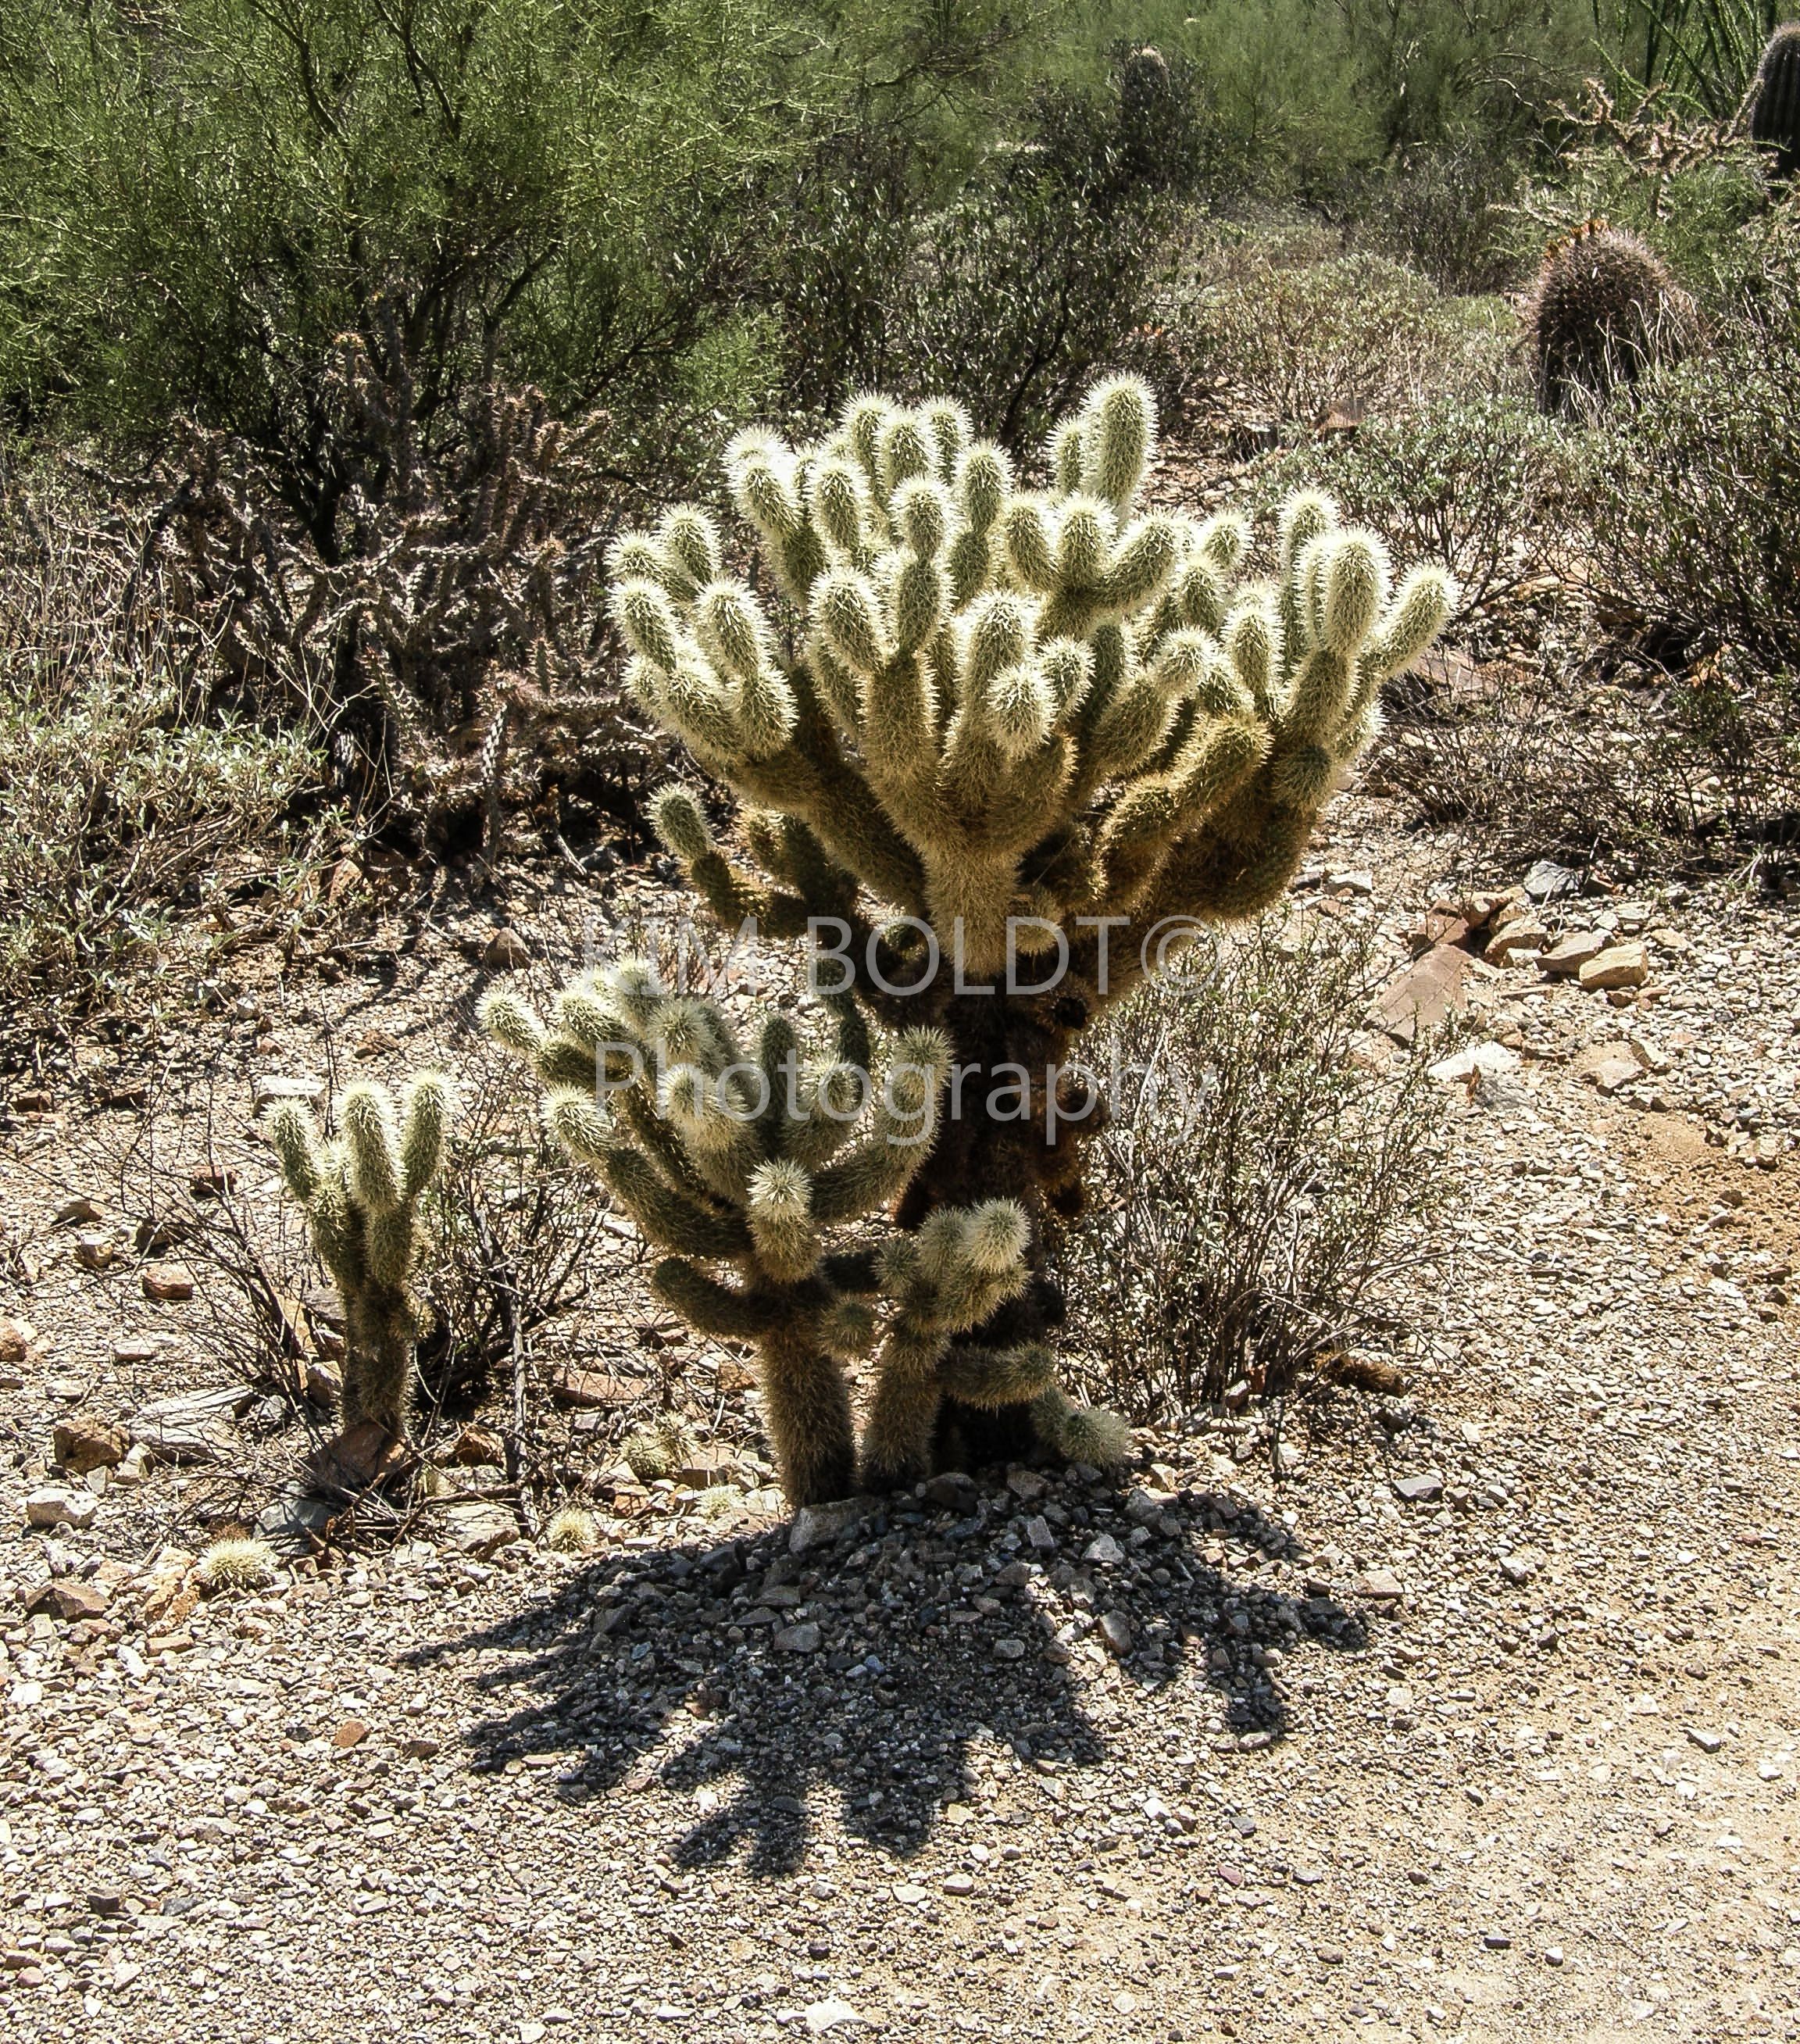 This is the jumping cholla also referred to as the teddy bear cactus ...